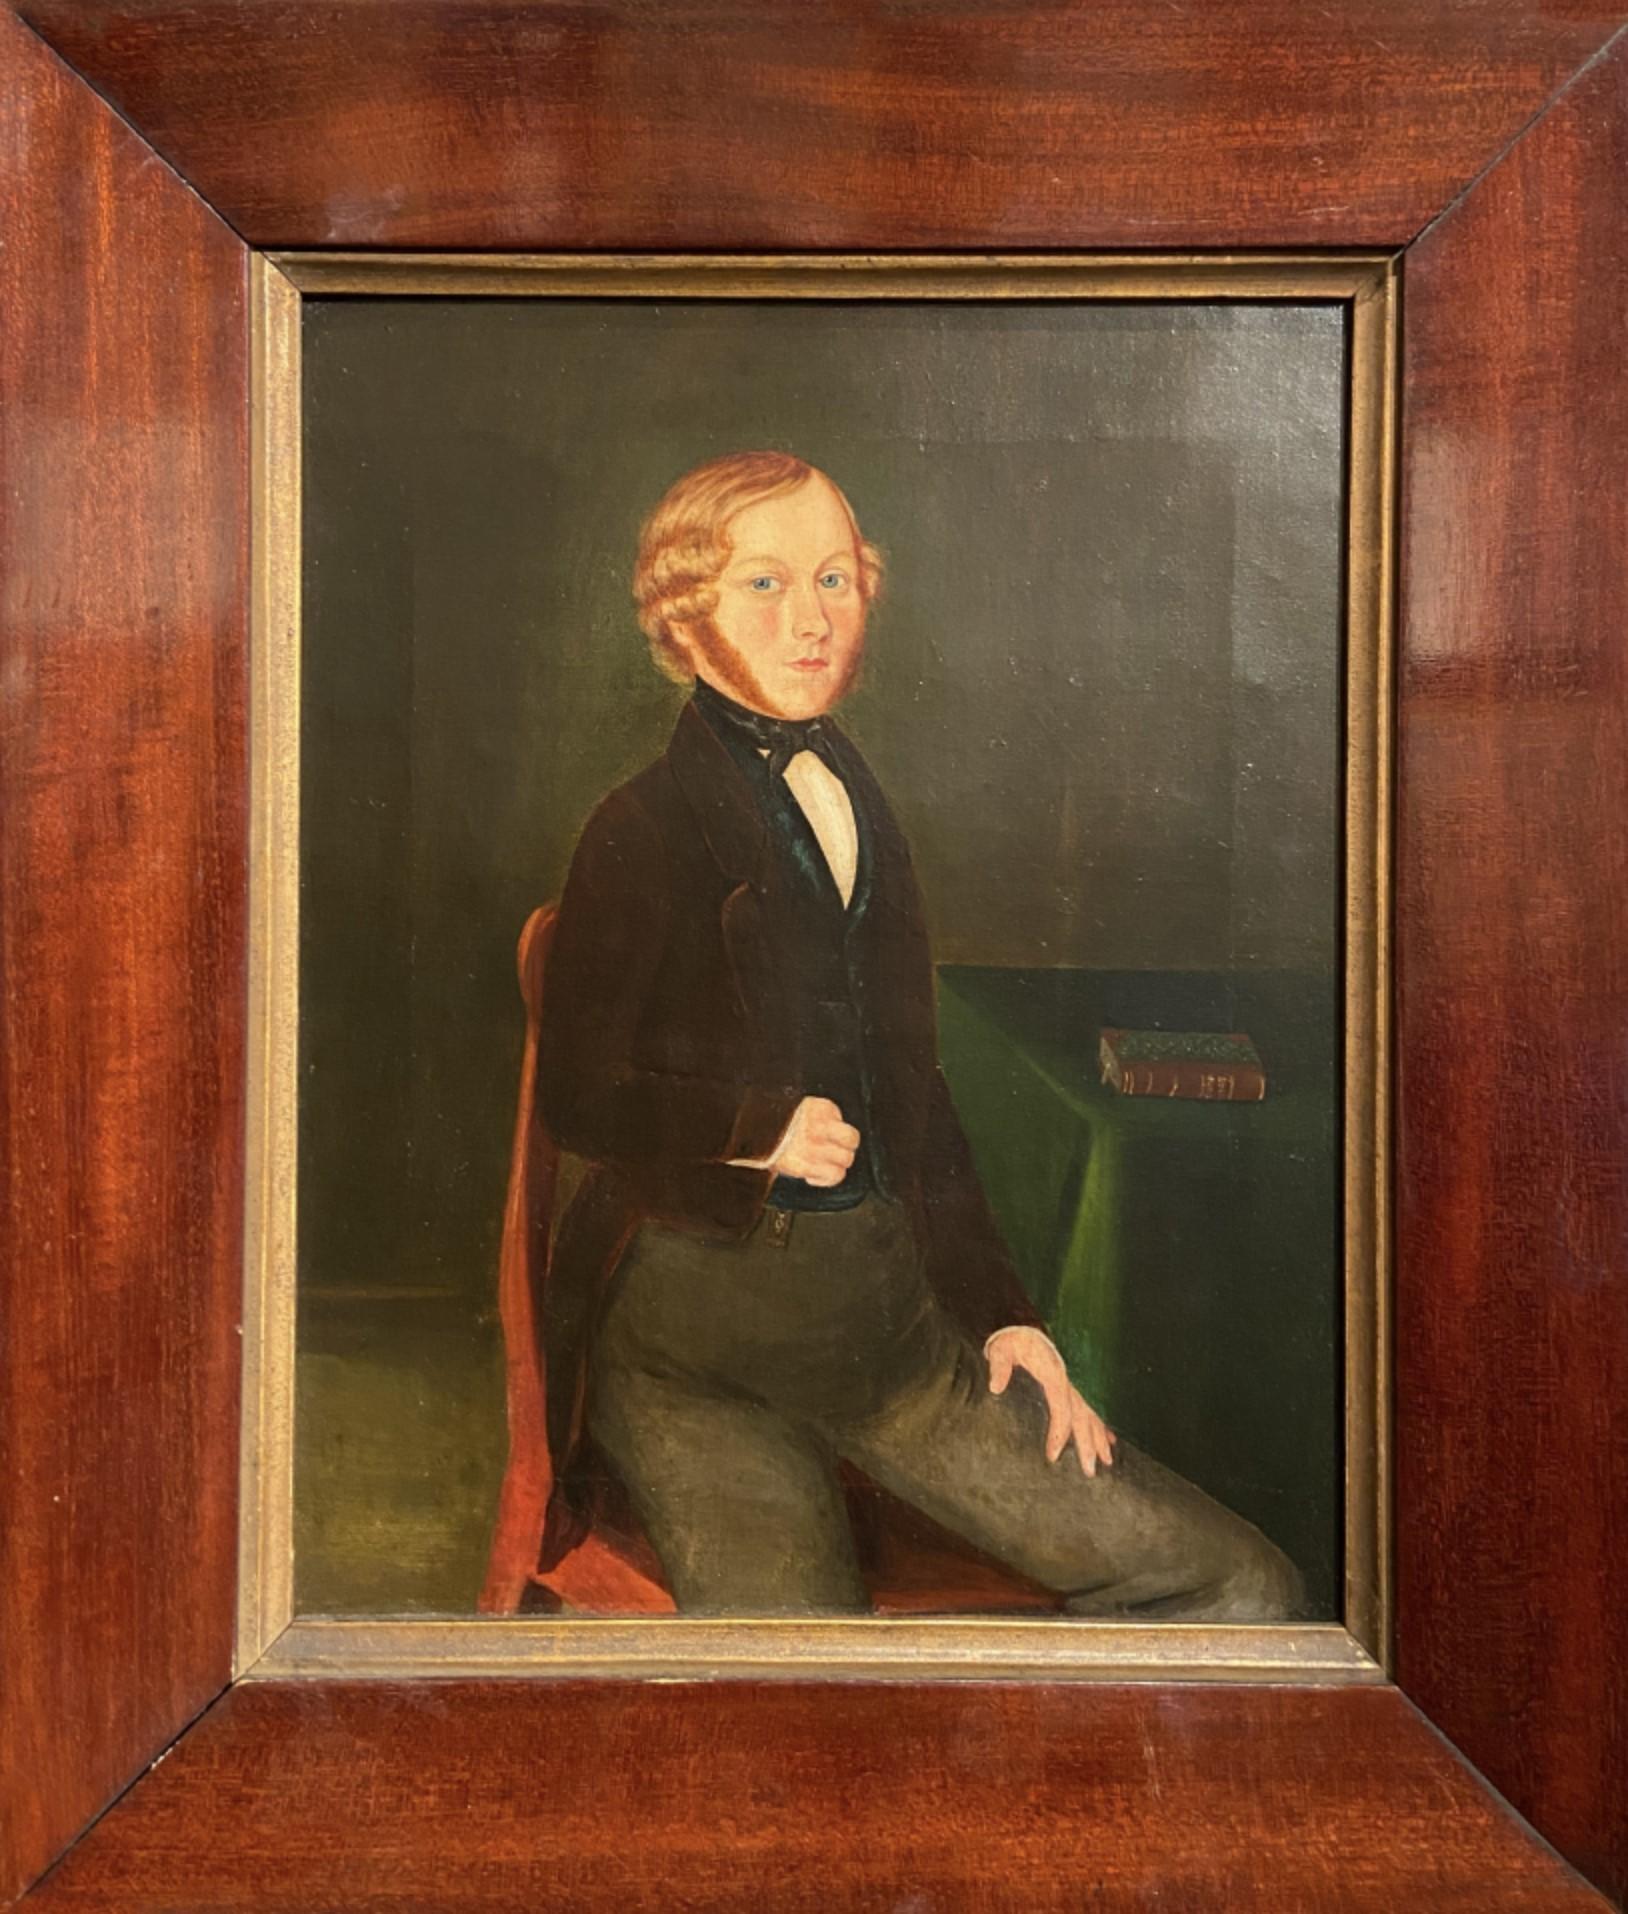 Oil on canvas
Image size: 9 x 13 3/4 inches (23 x 35 cm)
Period mahogany frame


Prior followed a successful format in which he included with his subjects an accessory or object that identified their gender or their individual interests, here we see